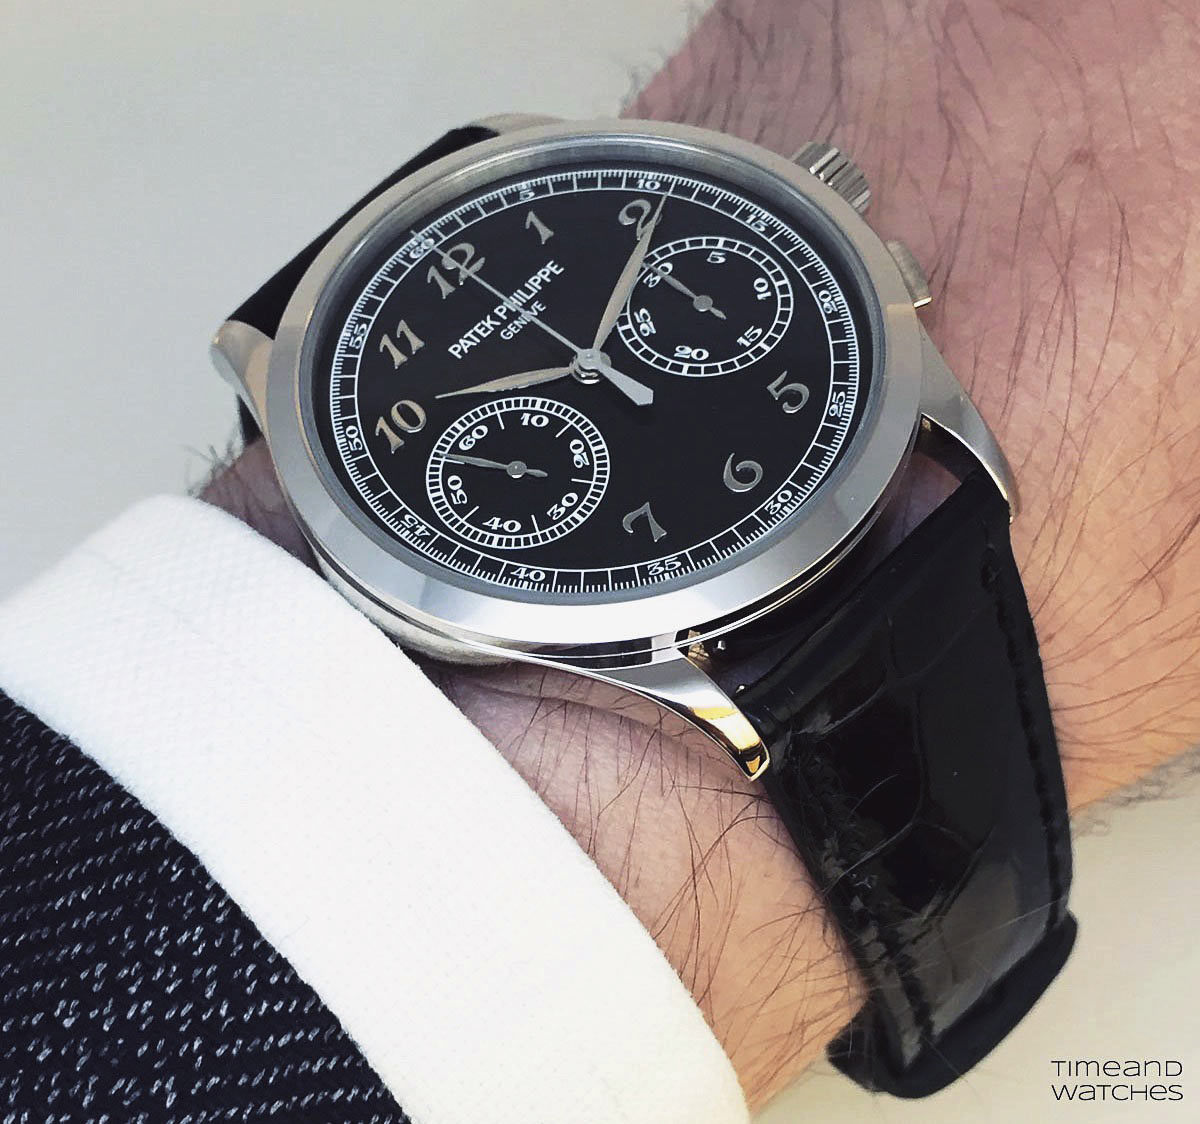 Patek Philippe - Reference 5170G-010 (Black Dial) | Time and Watches ...